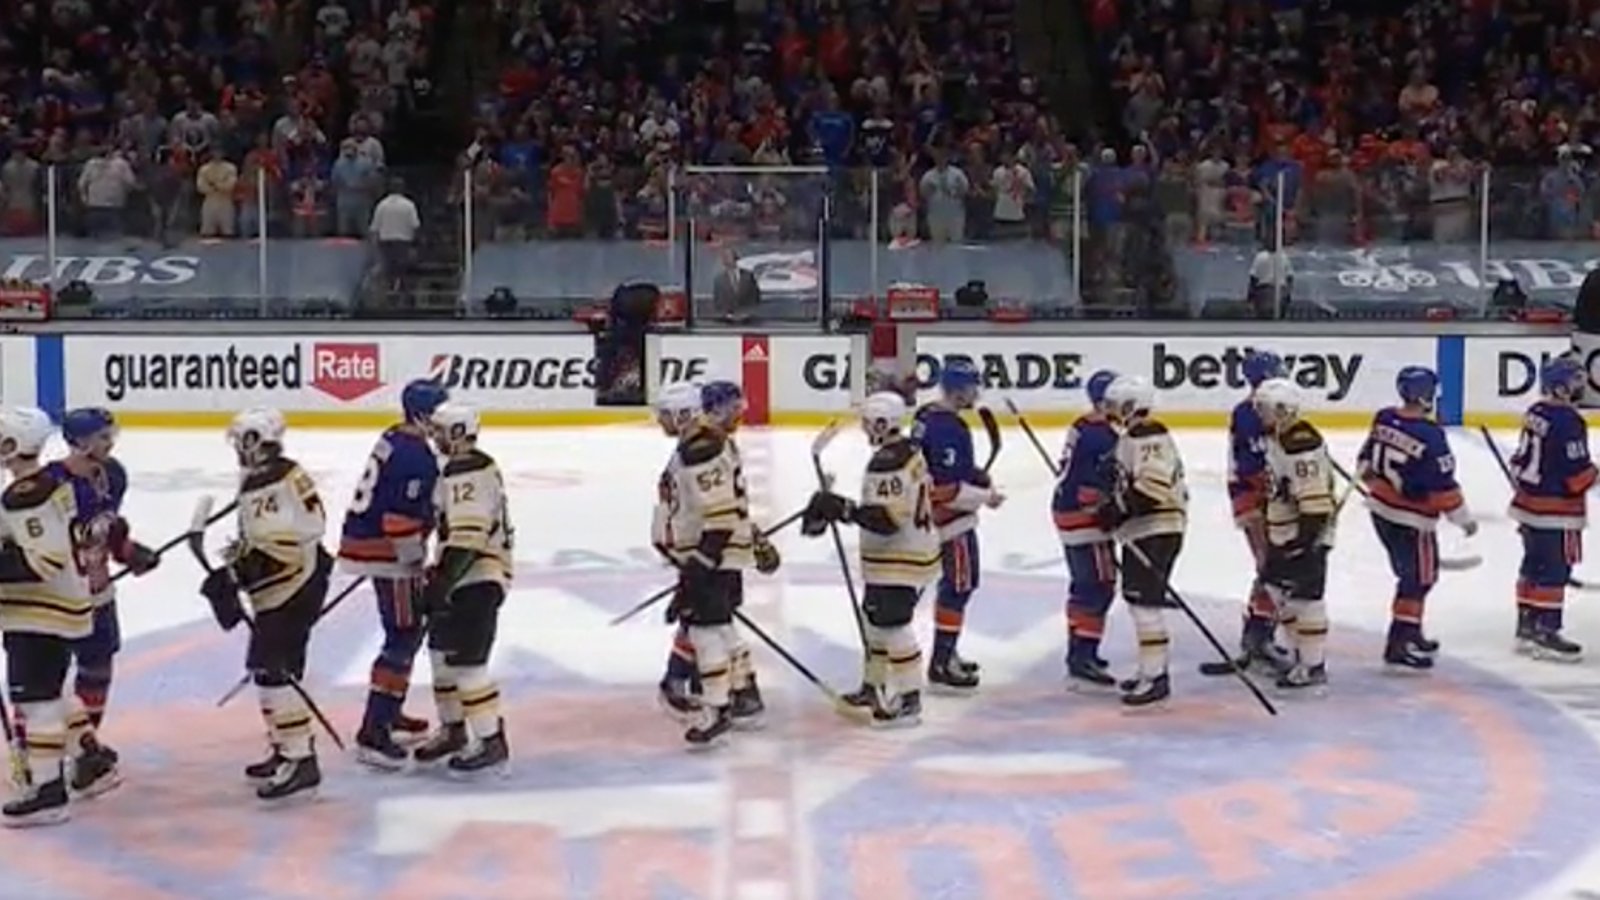 Bruins eliminated from the playoffs by Islanders in blowout 6-2 loss